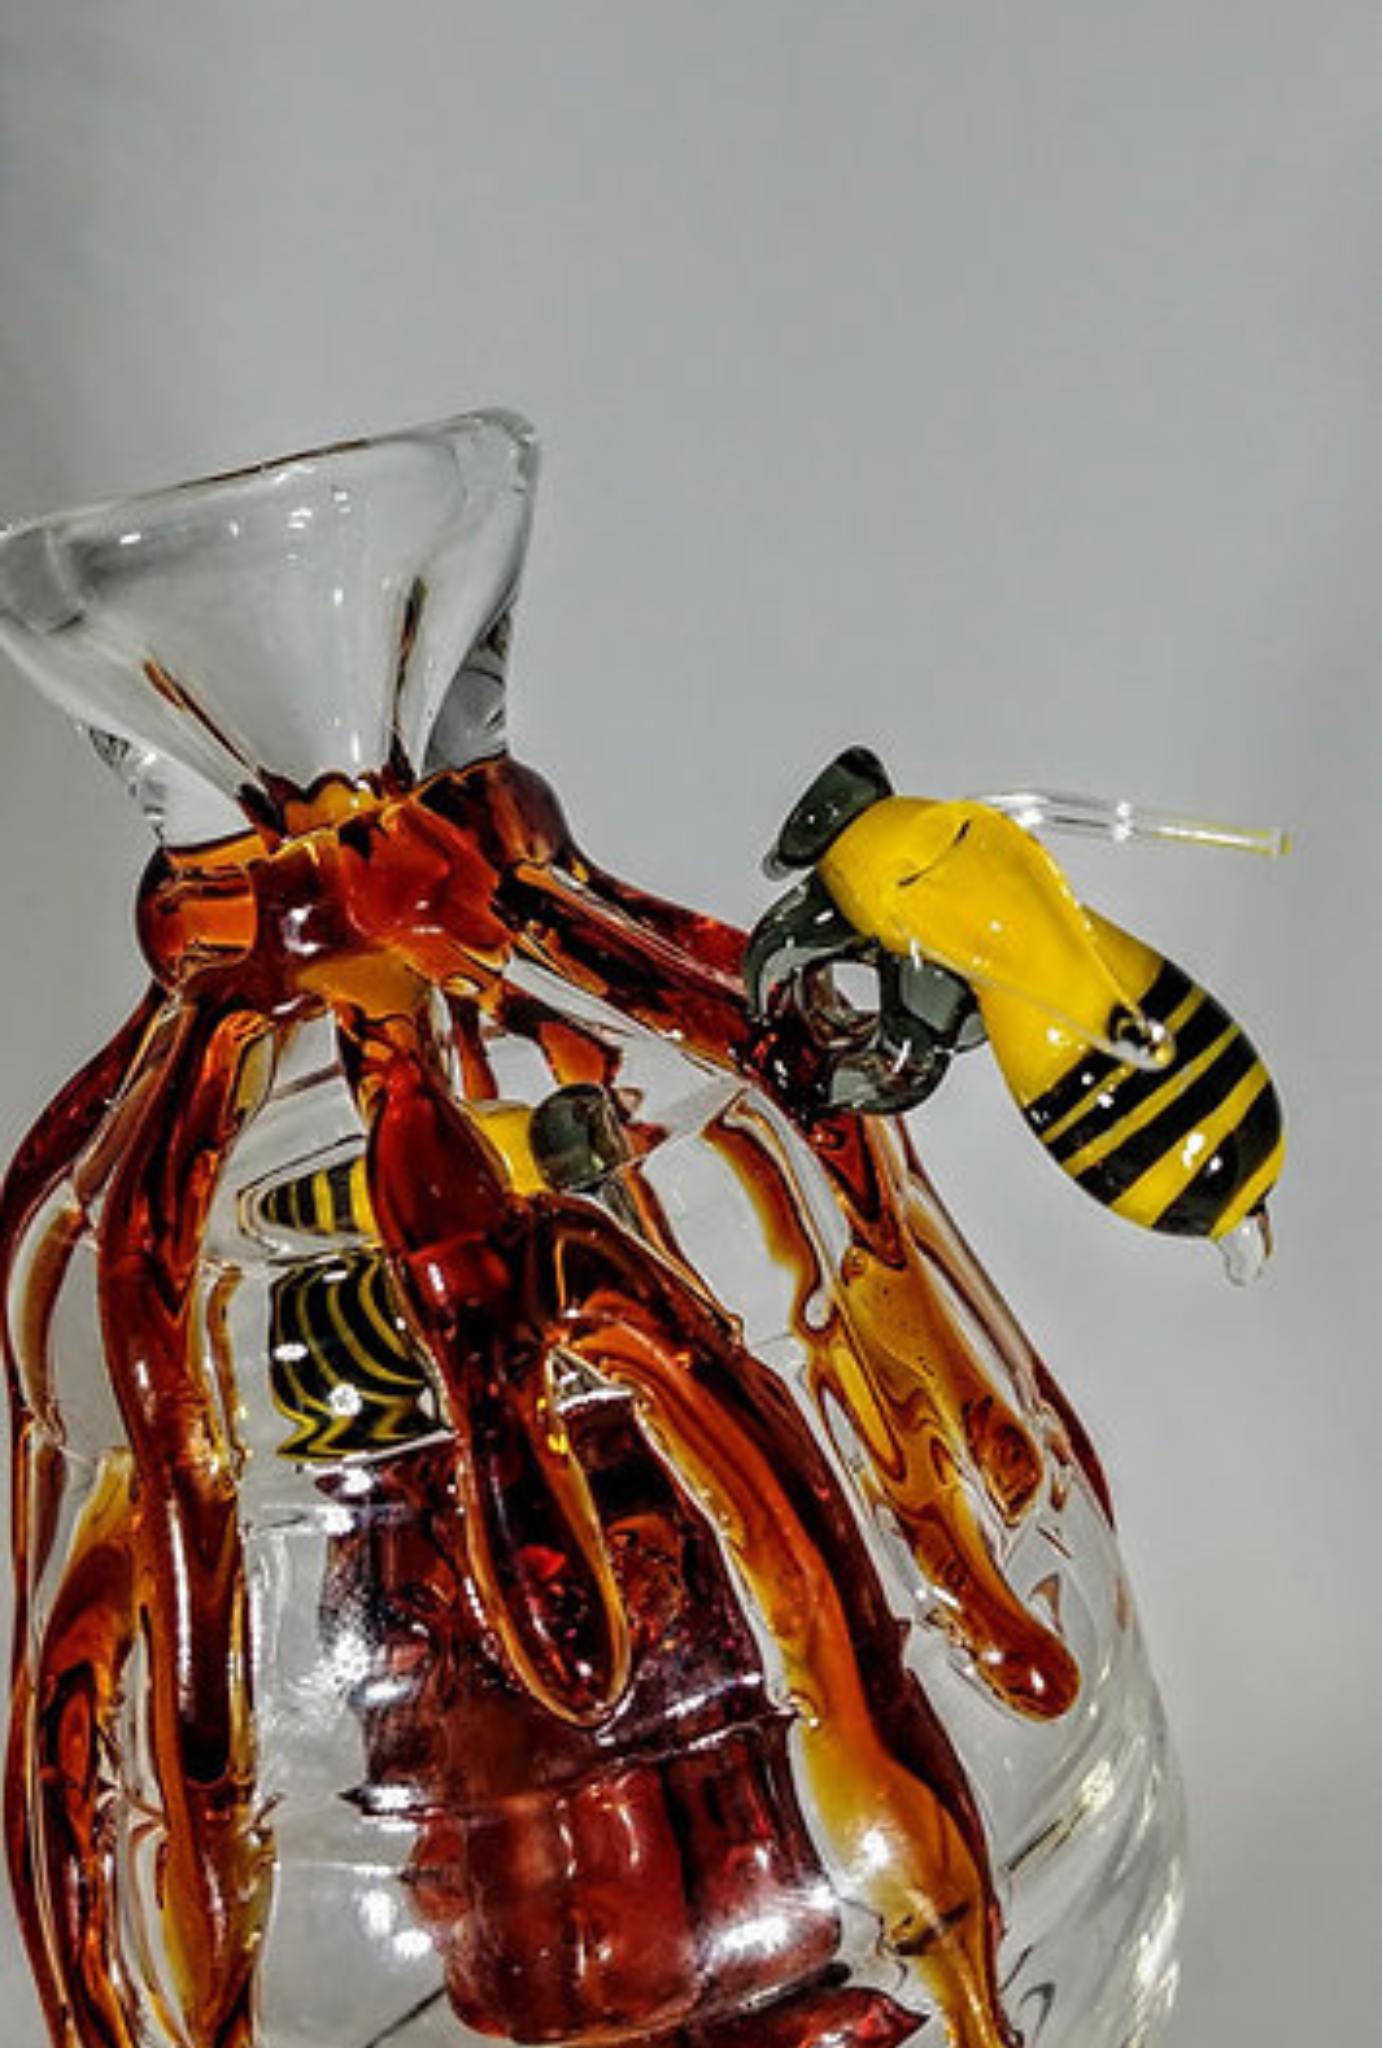 Beehive Drip With Beez Puffco Attachment with LED